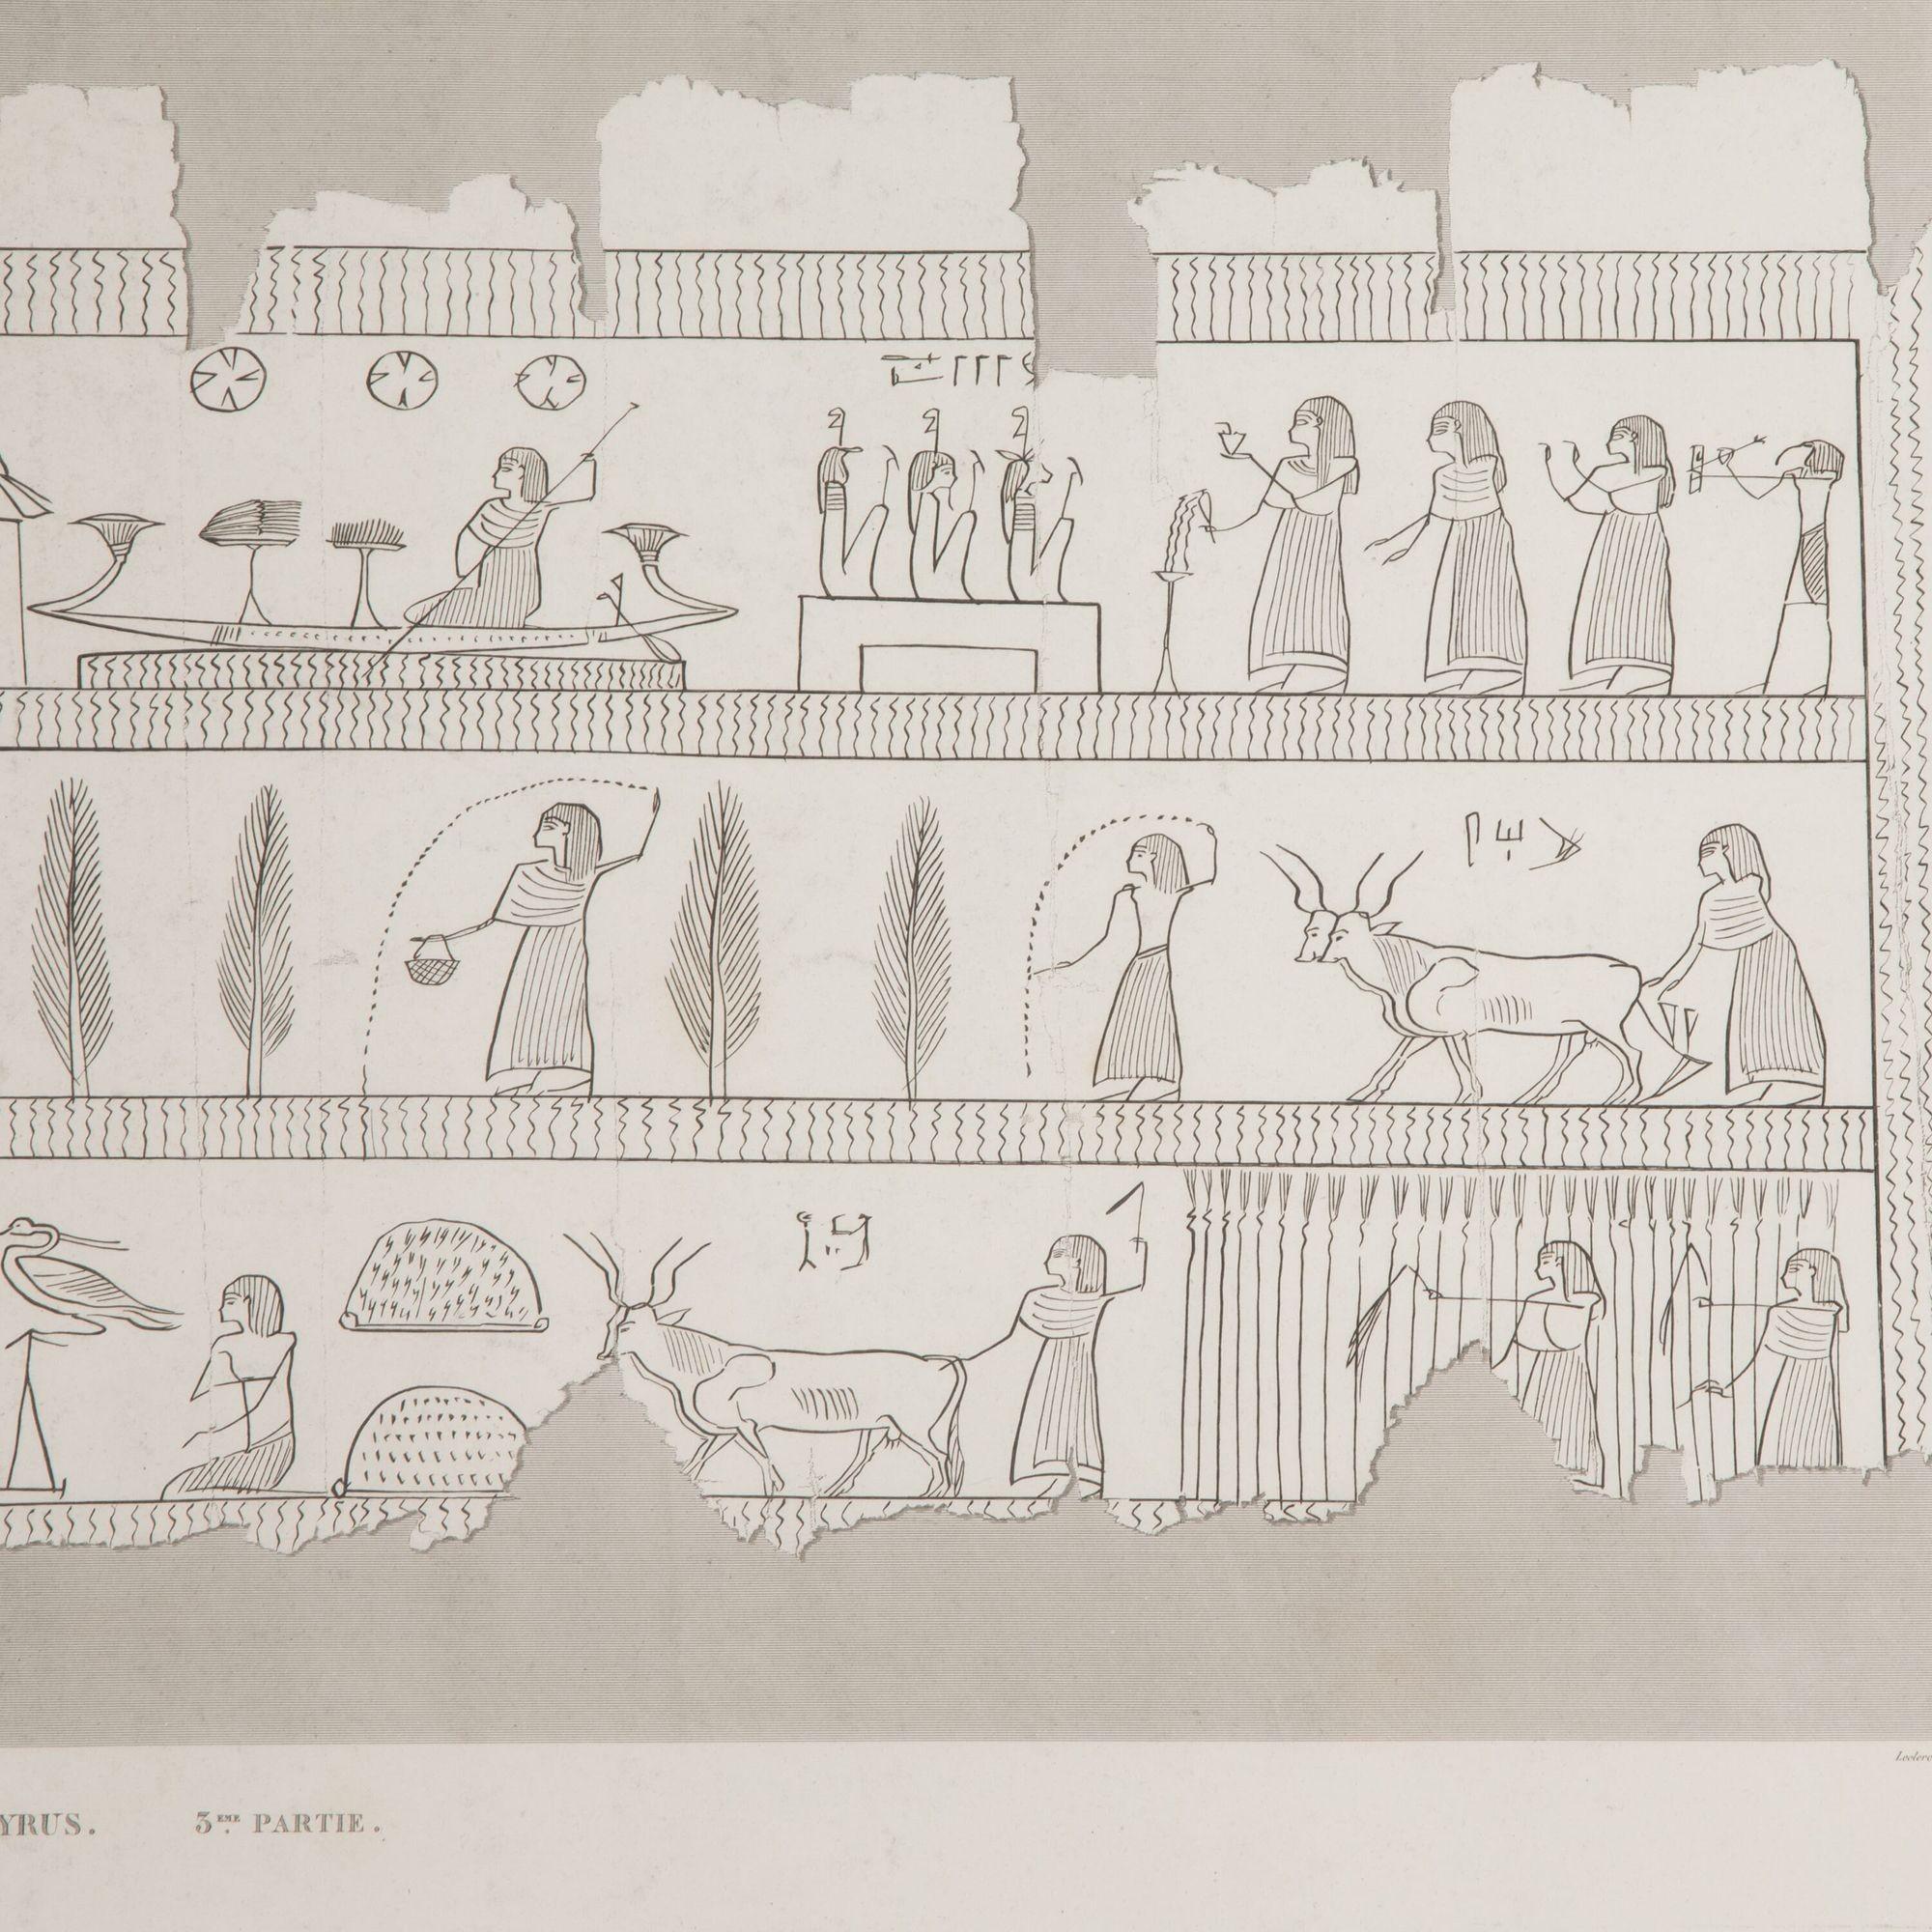 Wonderful illustrations from Egyptian tombs obtained during the late 18th Century French expedition to Egypt under Napoleon Bonaparte.
After Napoleon conquered Egypt in the early 1800's he sent teams of artists down to Egypt to record everything